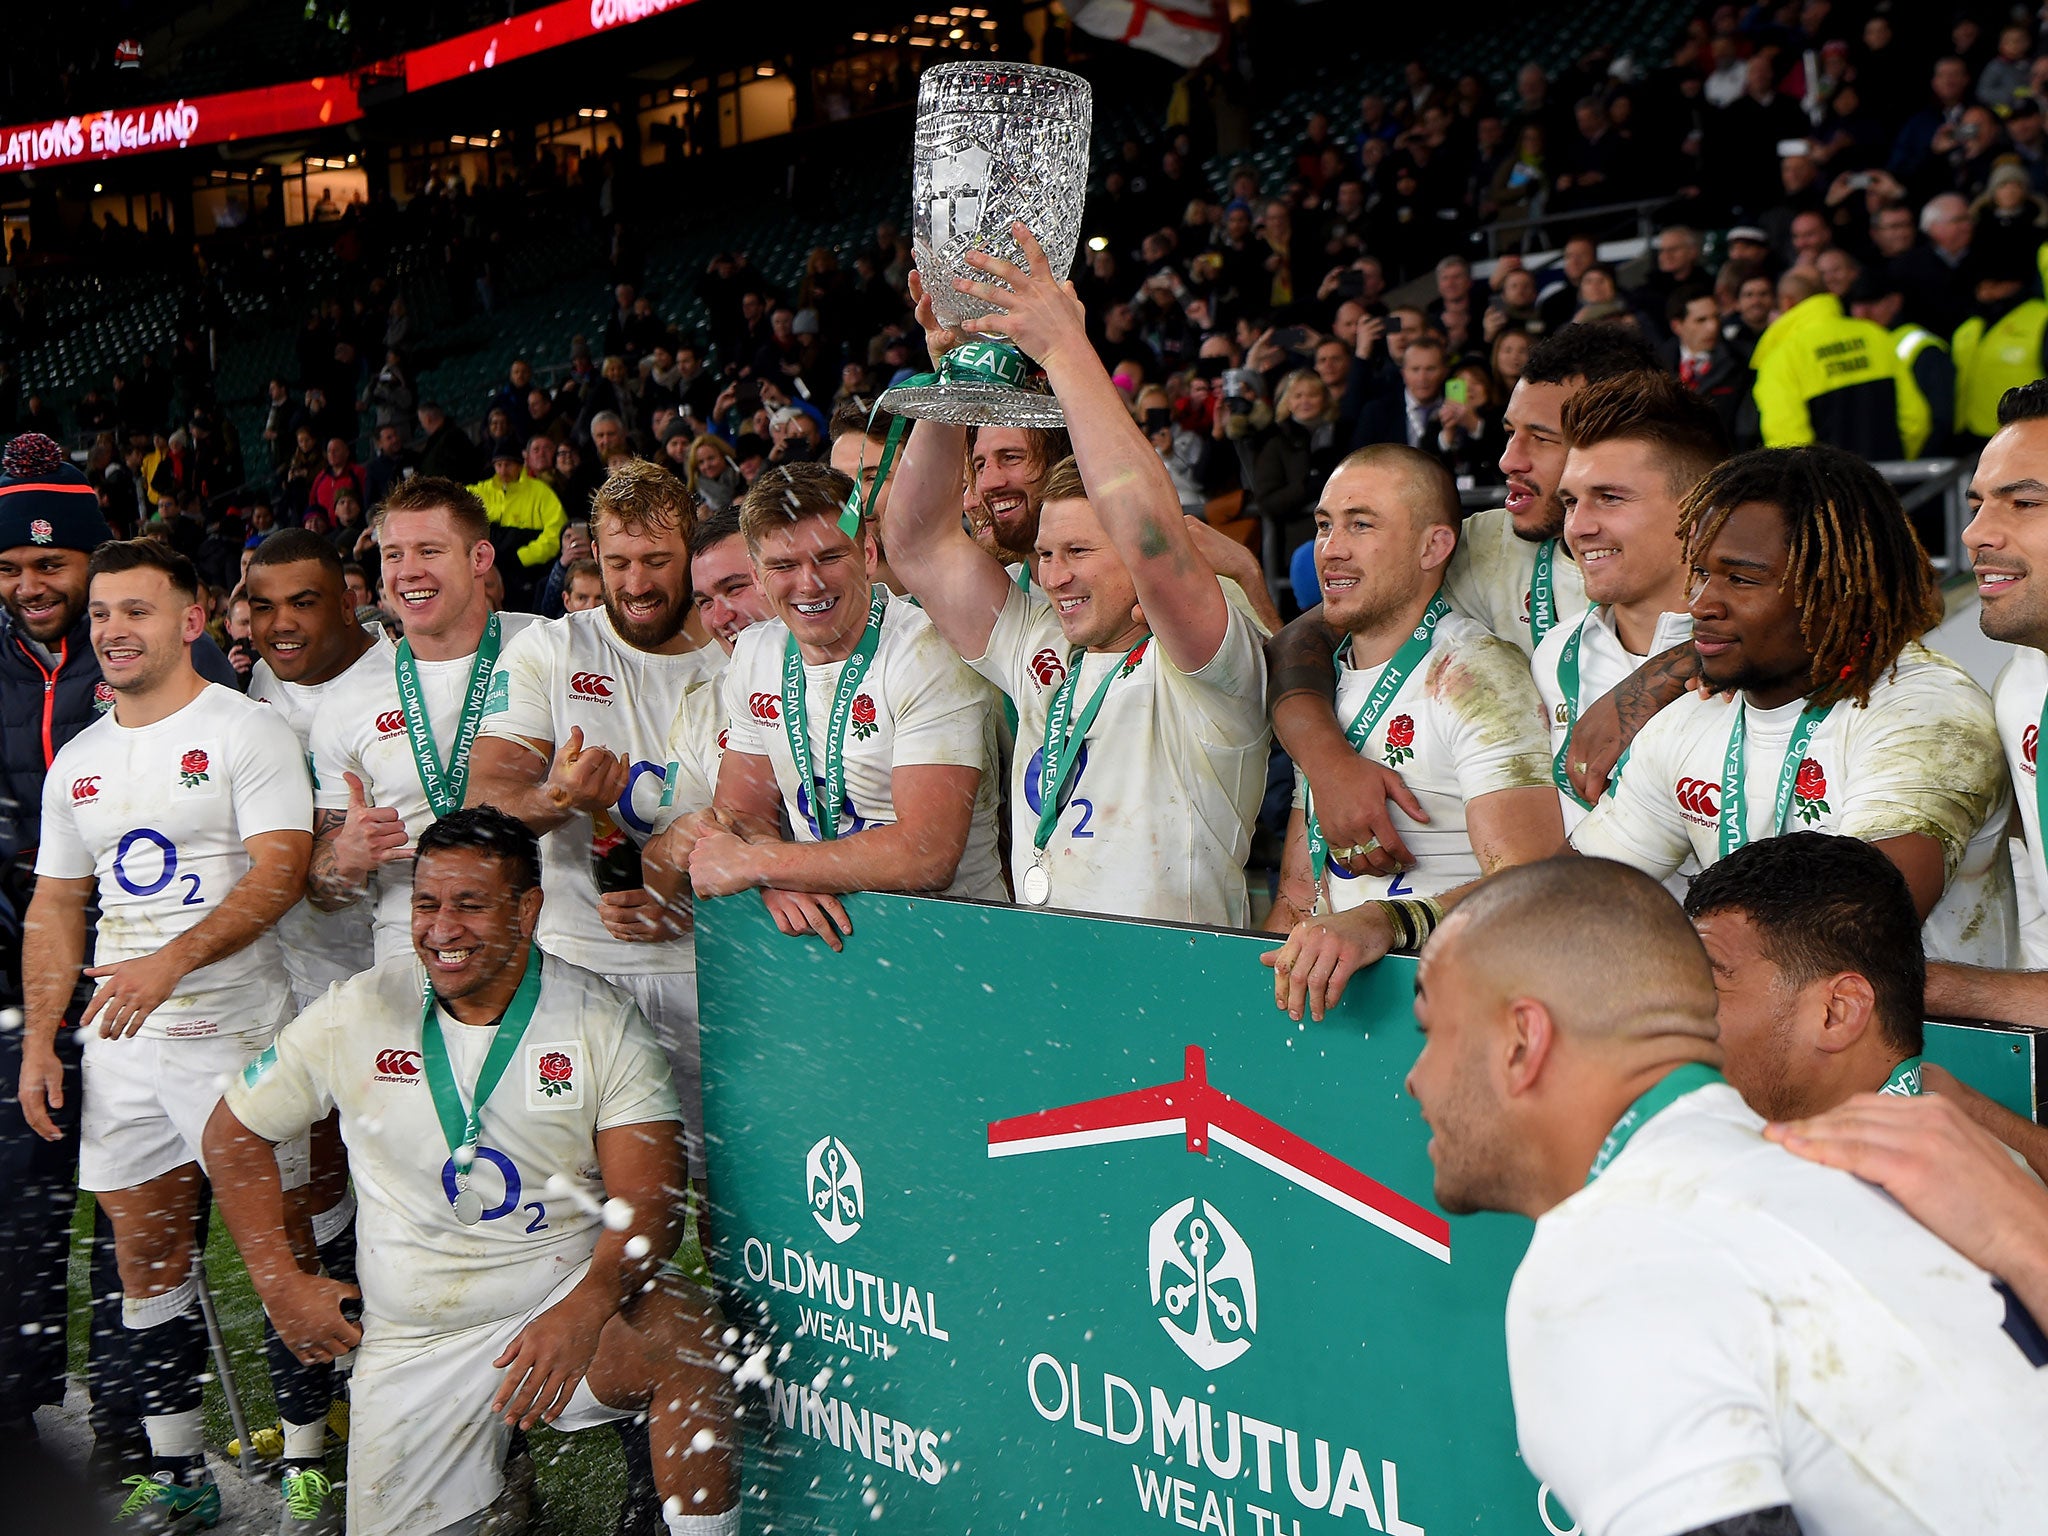 &#13;
England enjoyed a stellar year of rugby with Hartley as the side's captain &#13;